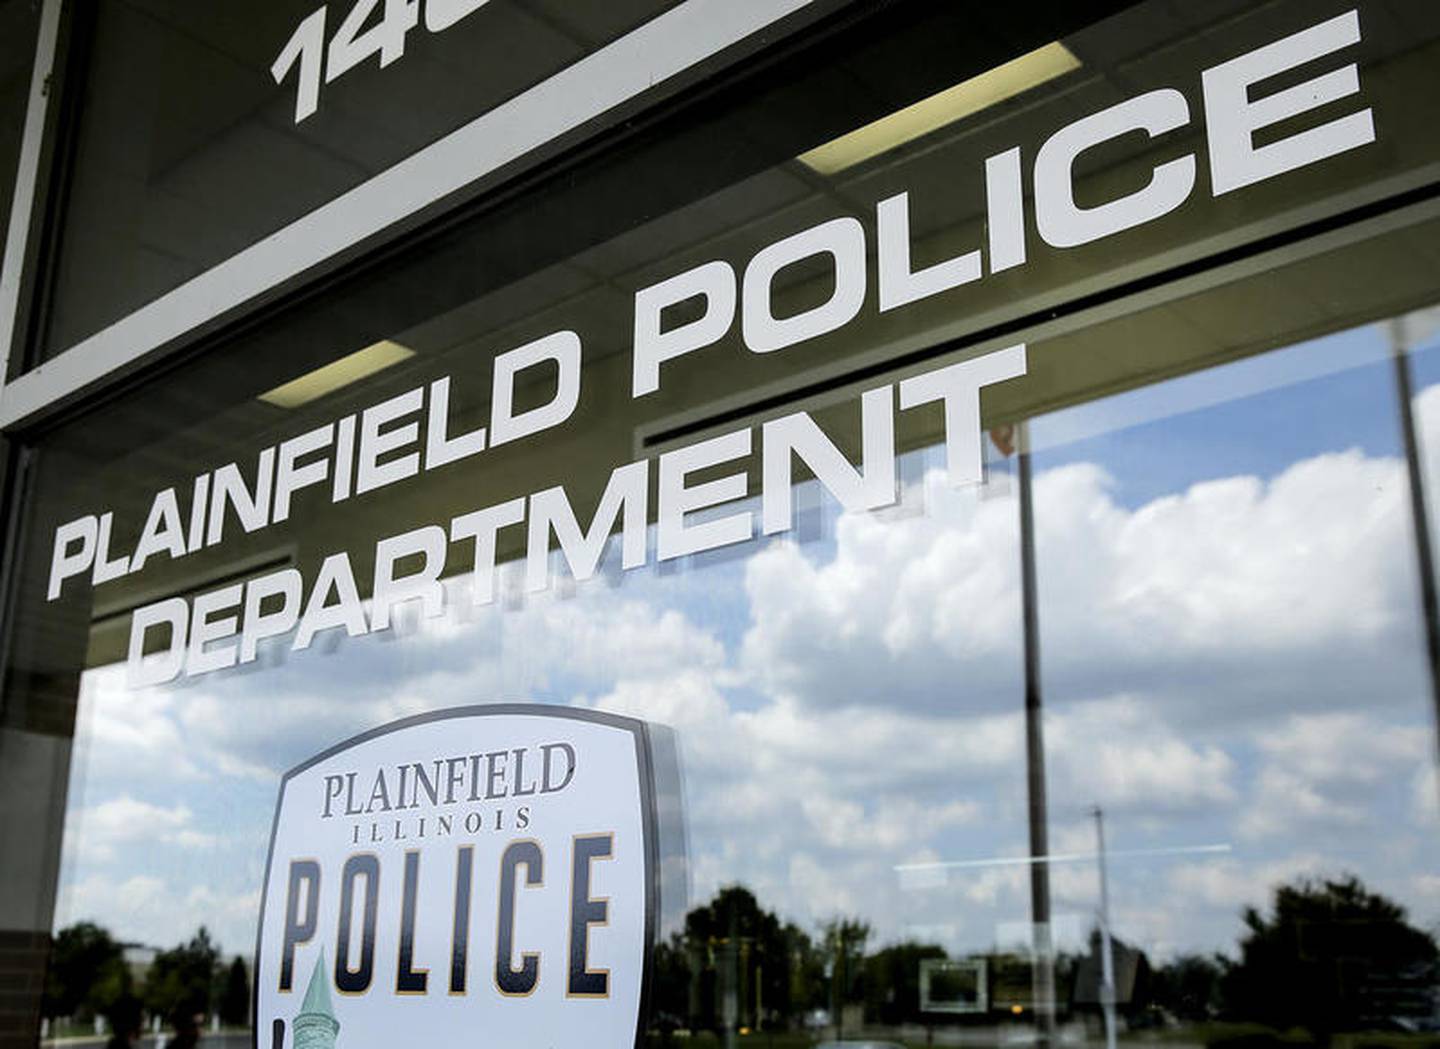 The Plainfield Police Department on Wednesday, Aug. 9, 2017, in Plainfield, Ill